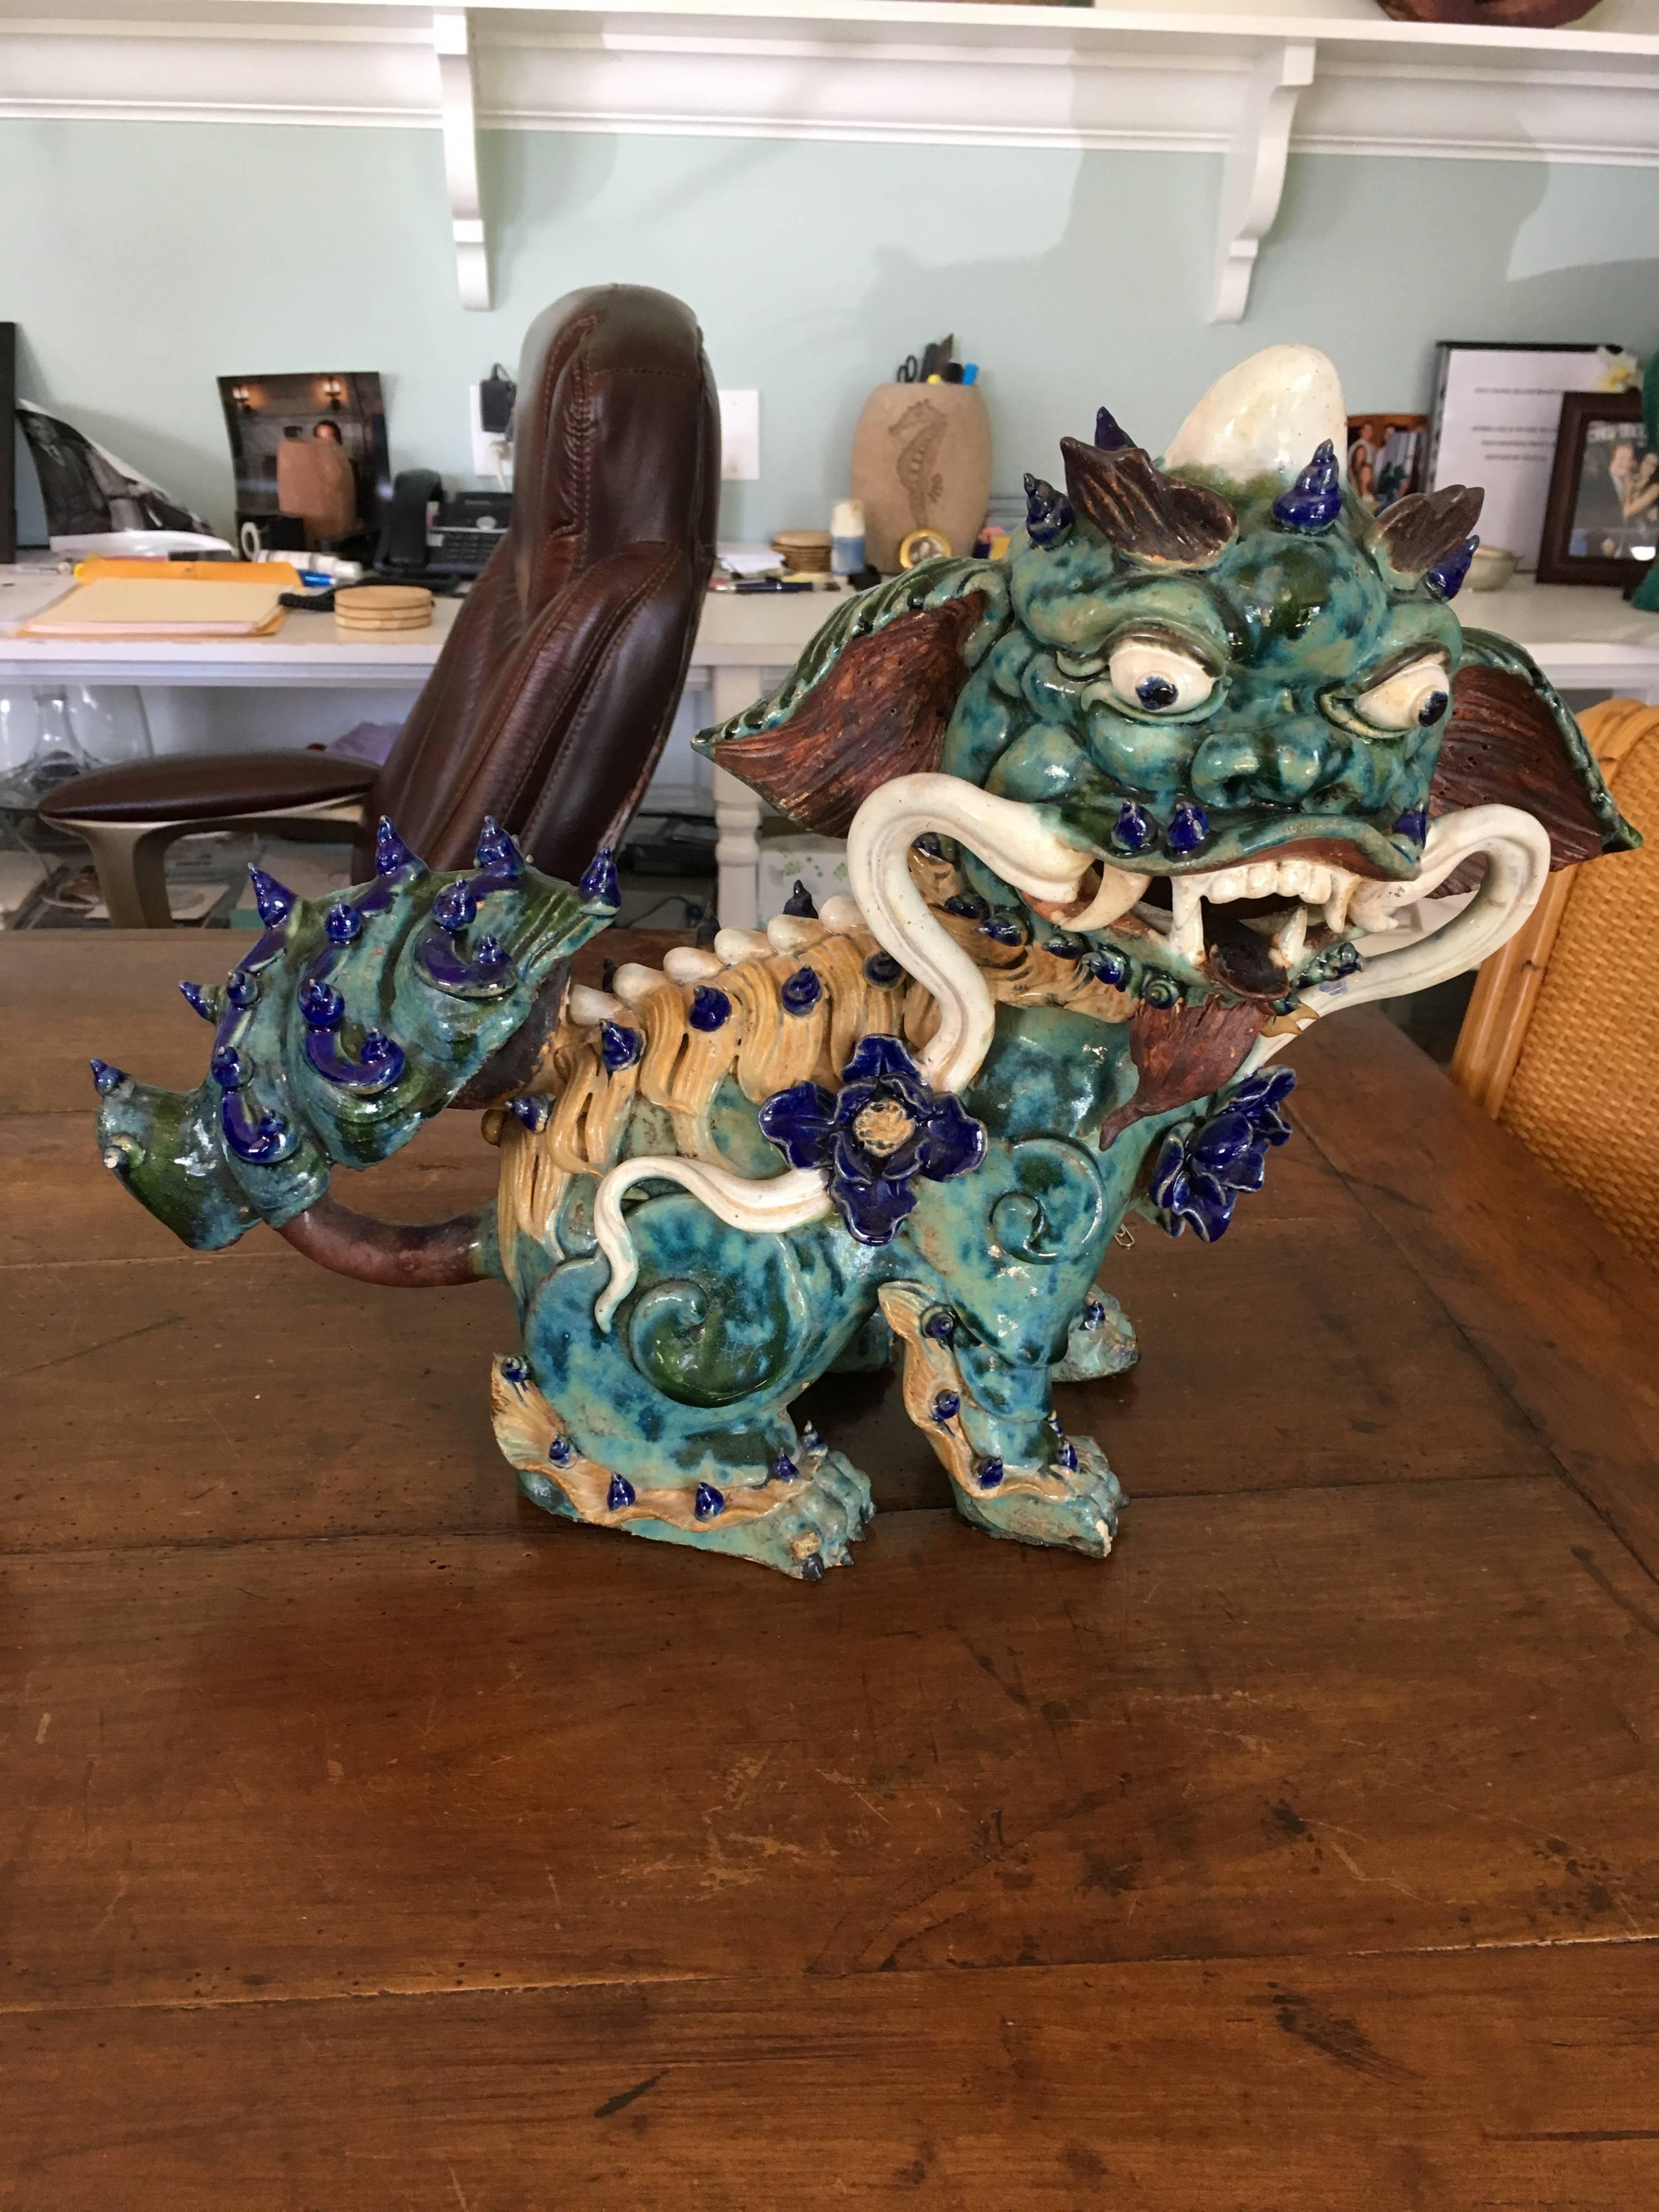 This pair of foo dogs came from Shi Wan Kiln in Guangzhou China Made by Yuhua Ceramic Company Leaded glazes (The company was closed during the war and reopened after 1980).